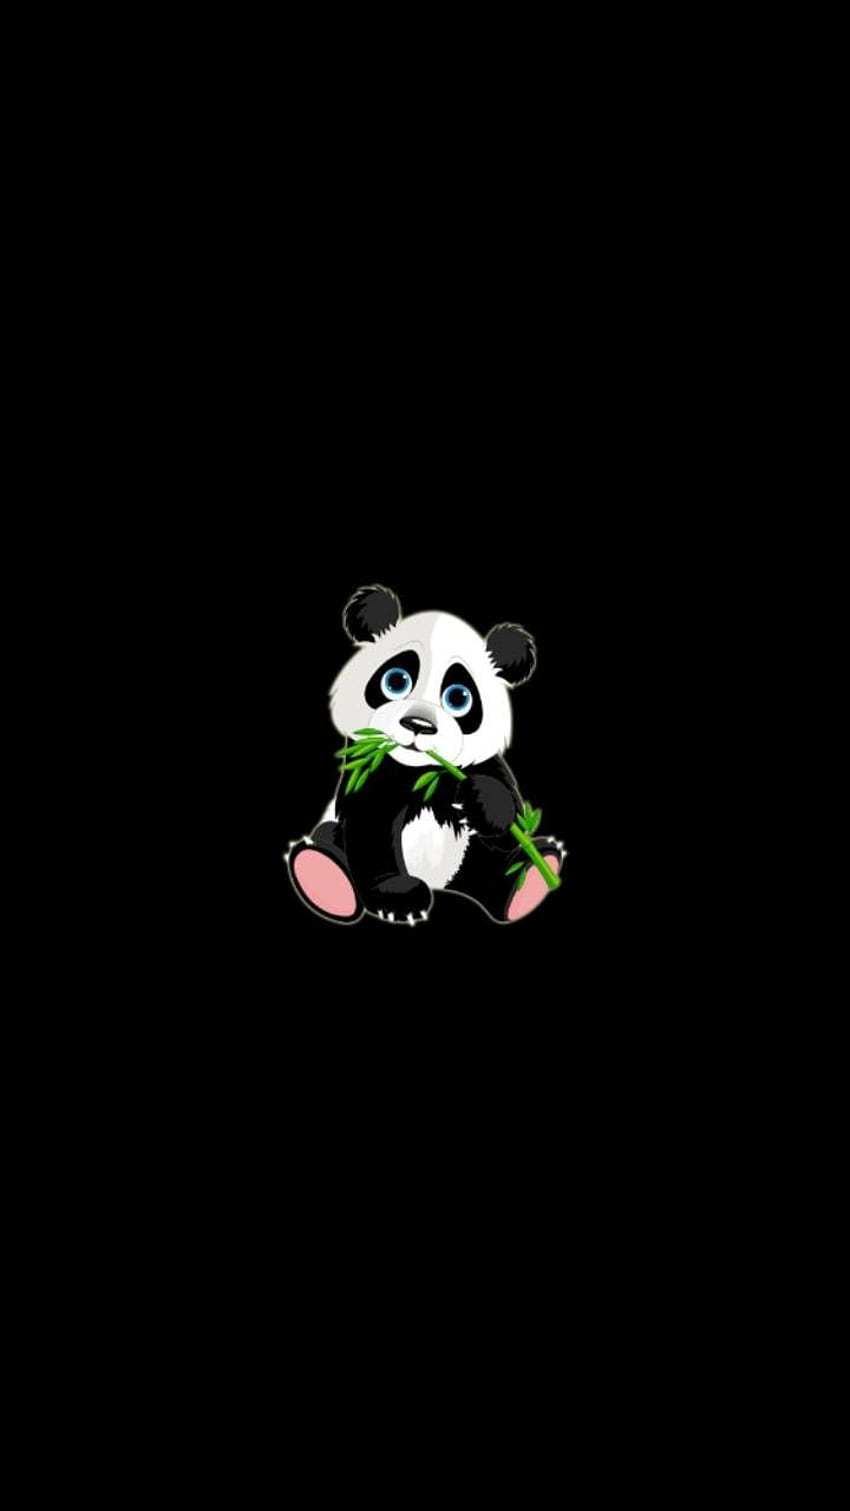 60 Baby Panda Wallpapers HD 4K 5K for PC and Mobile  Download free  images for iPhone Android